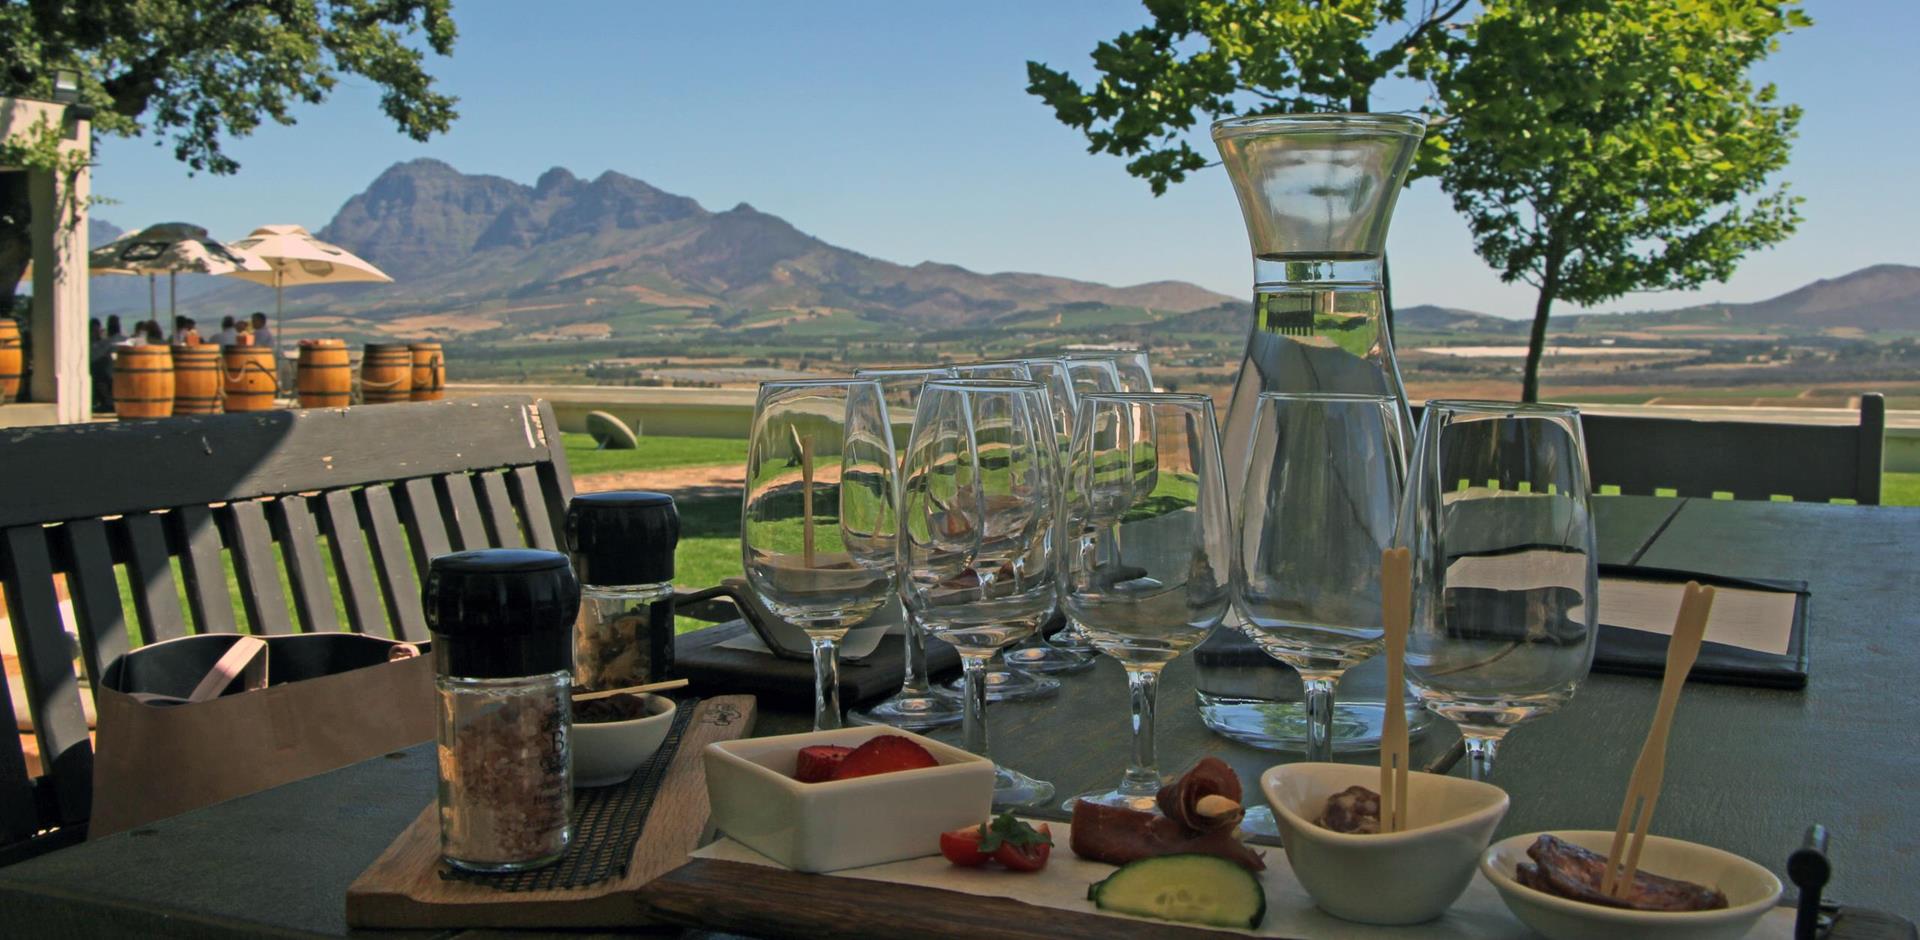 Paarl, South Africa